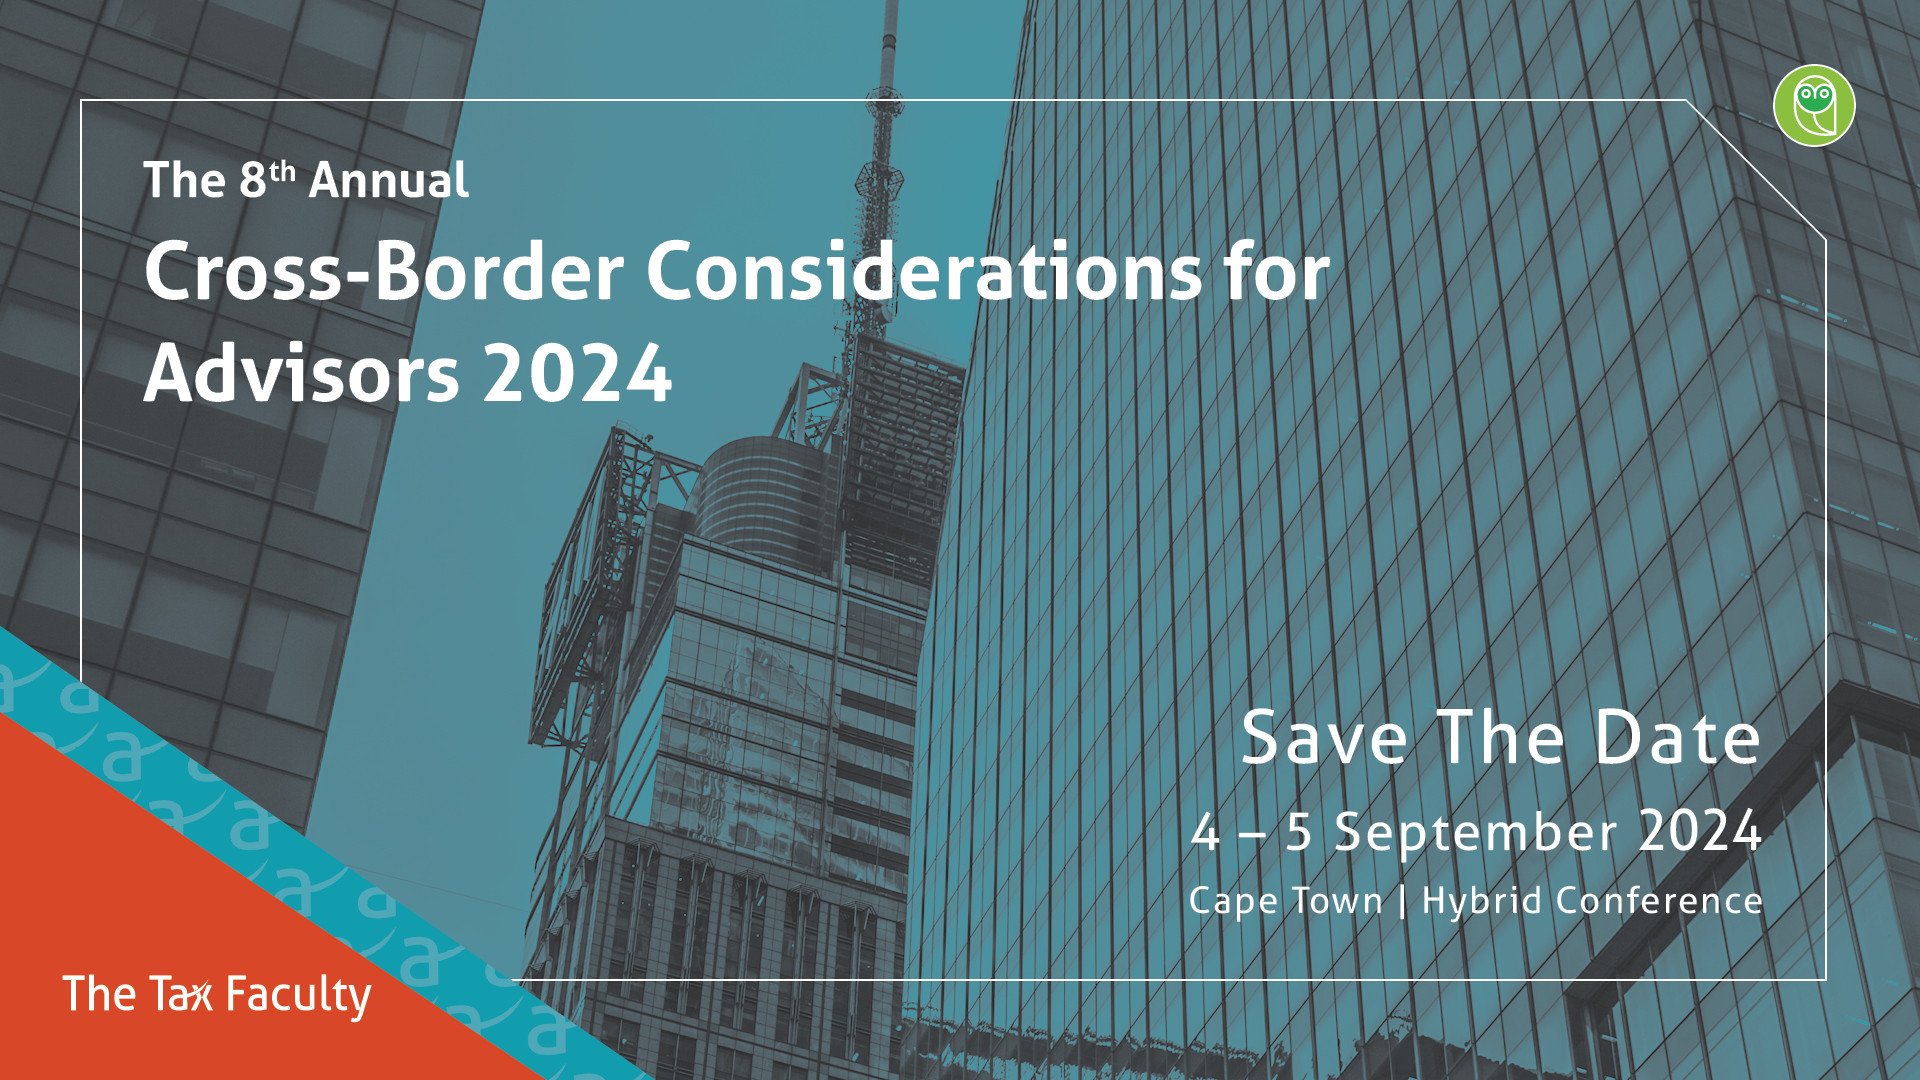 The 8th Annual Cross-Border Considerations For Advisors Conference